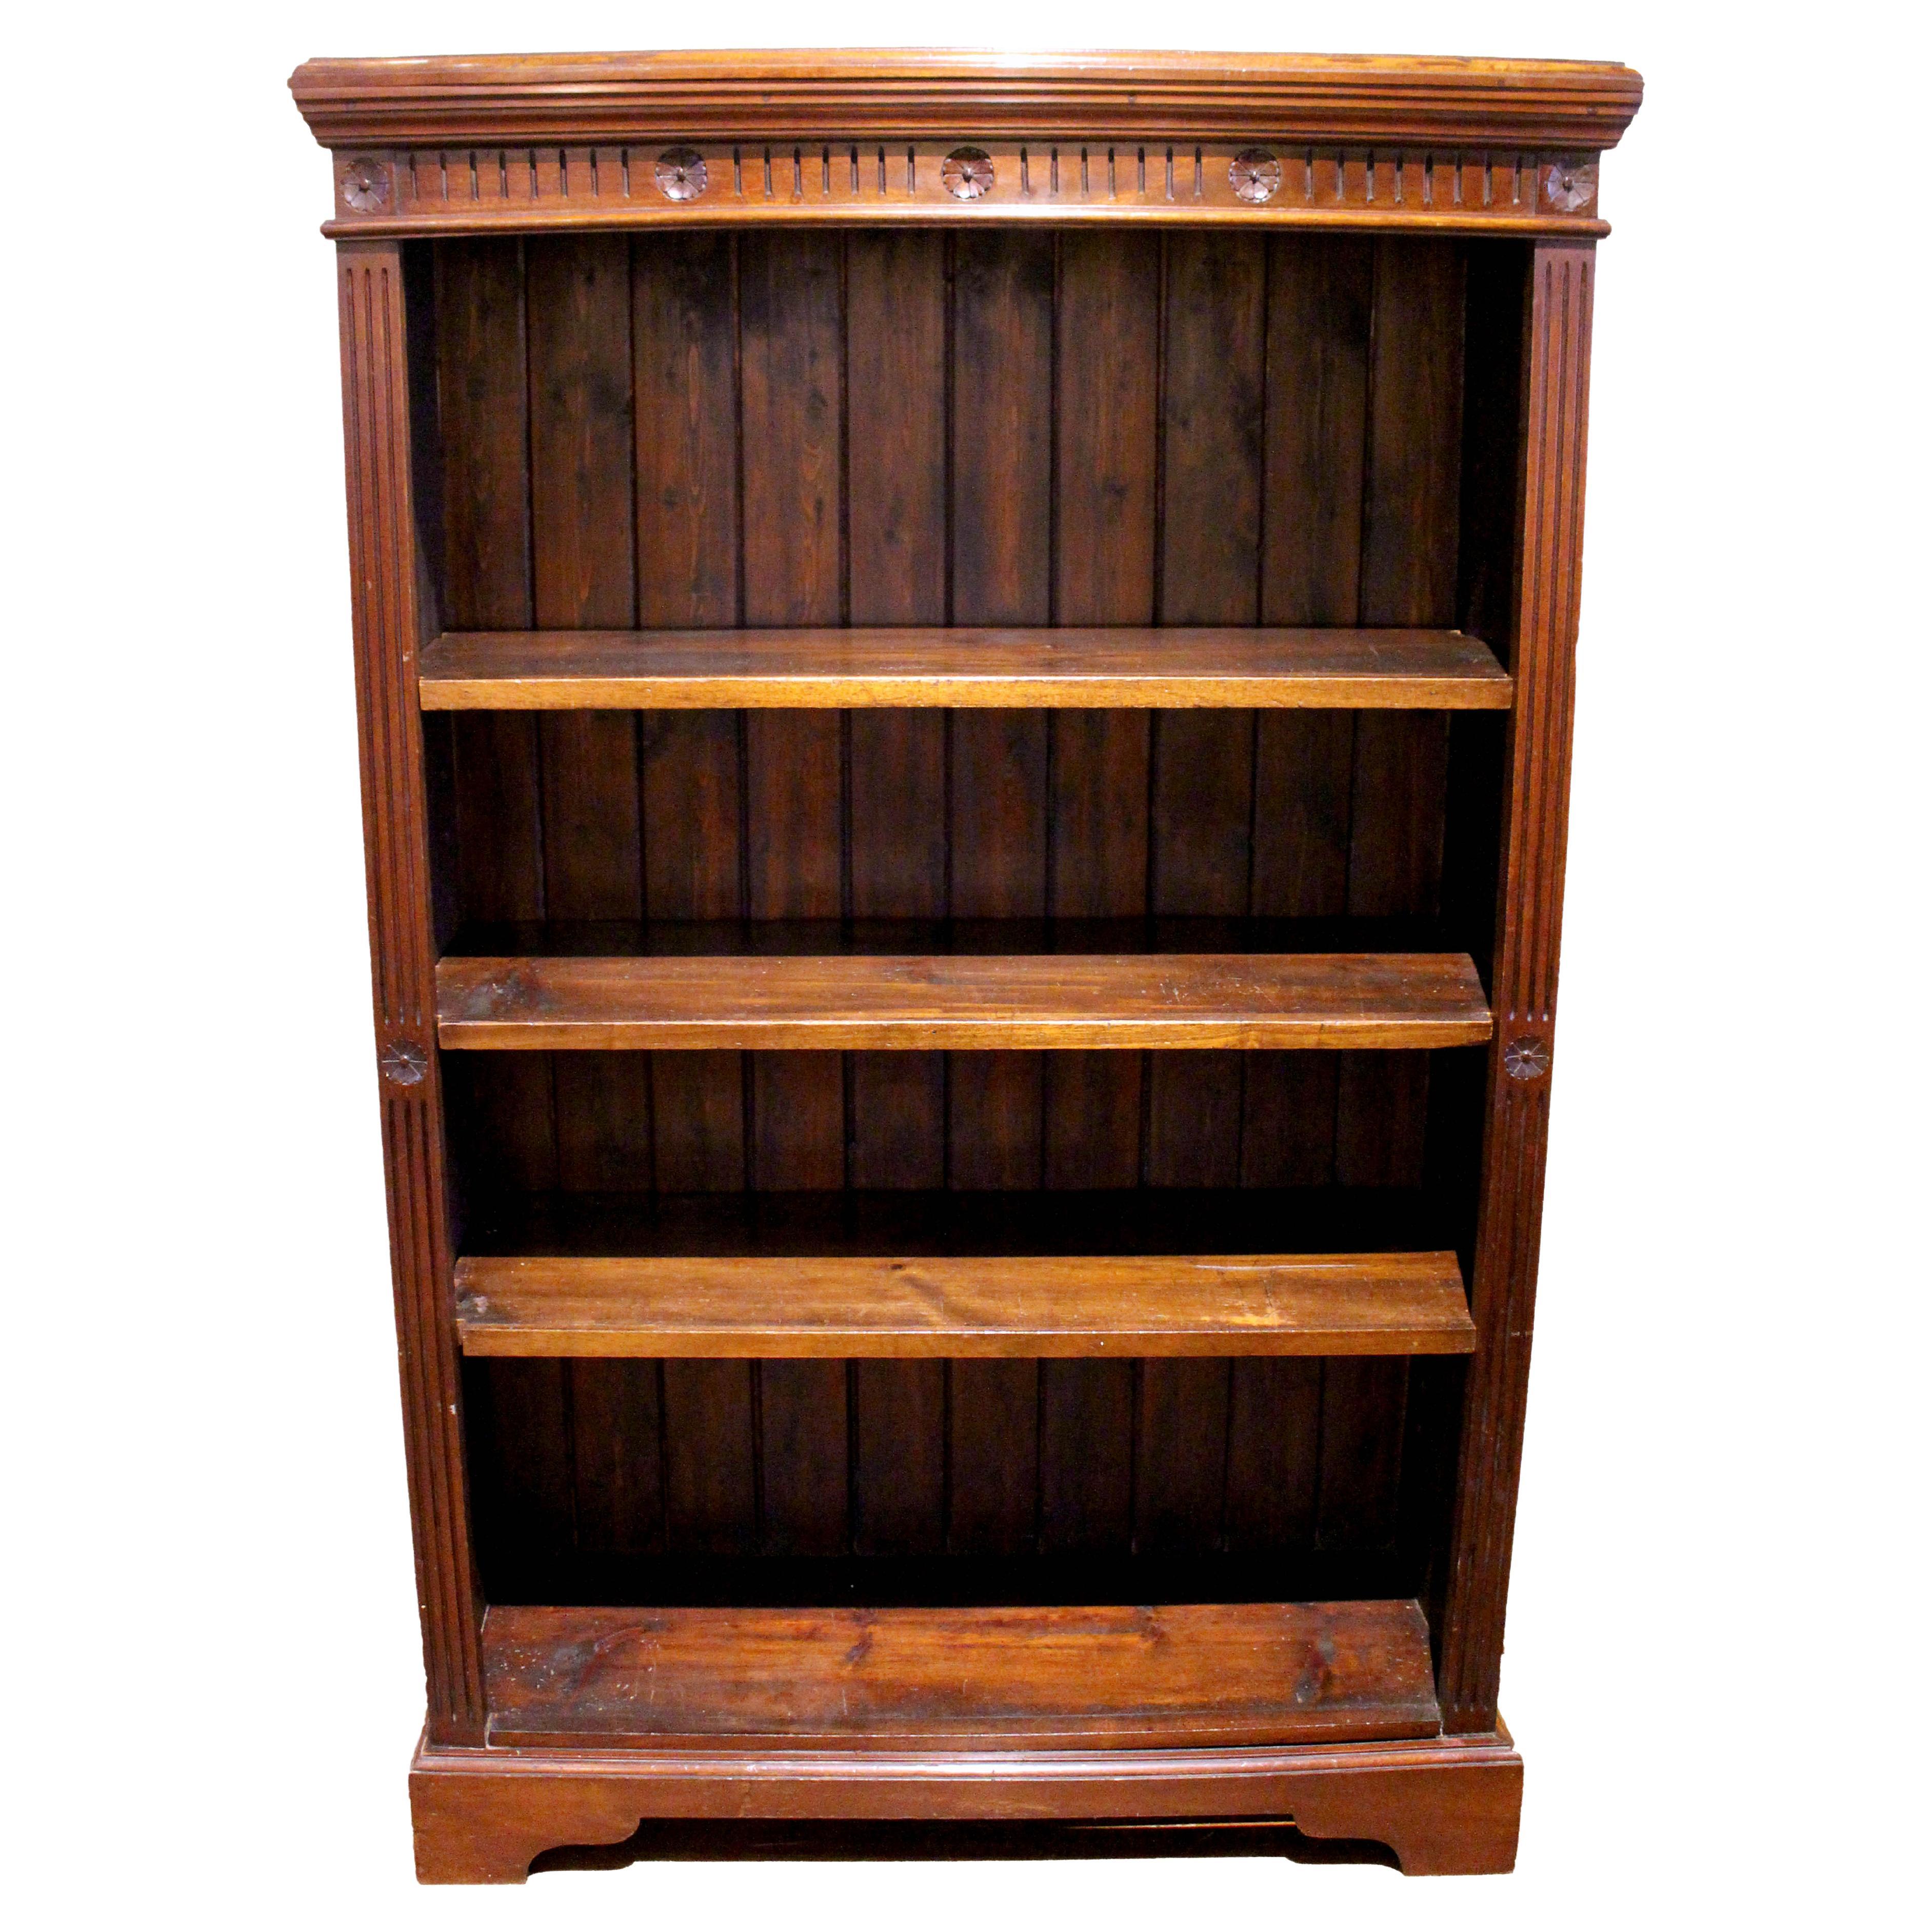 Late 19th-early 20th Century Open Bookcase, English